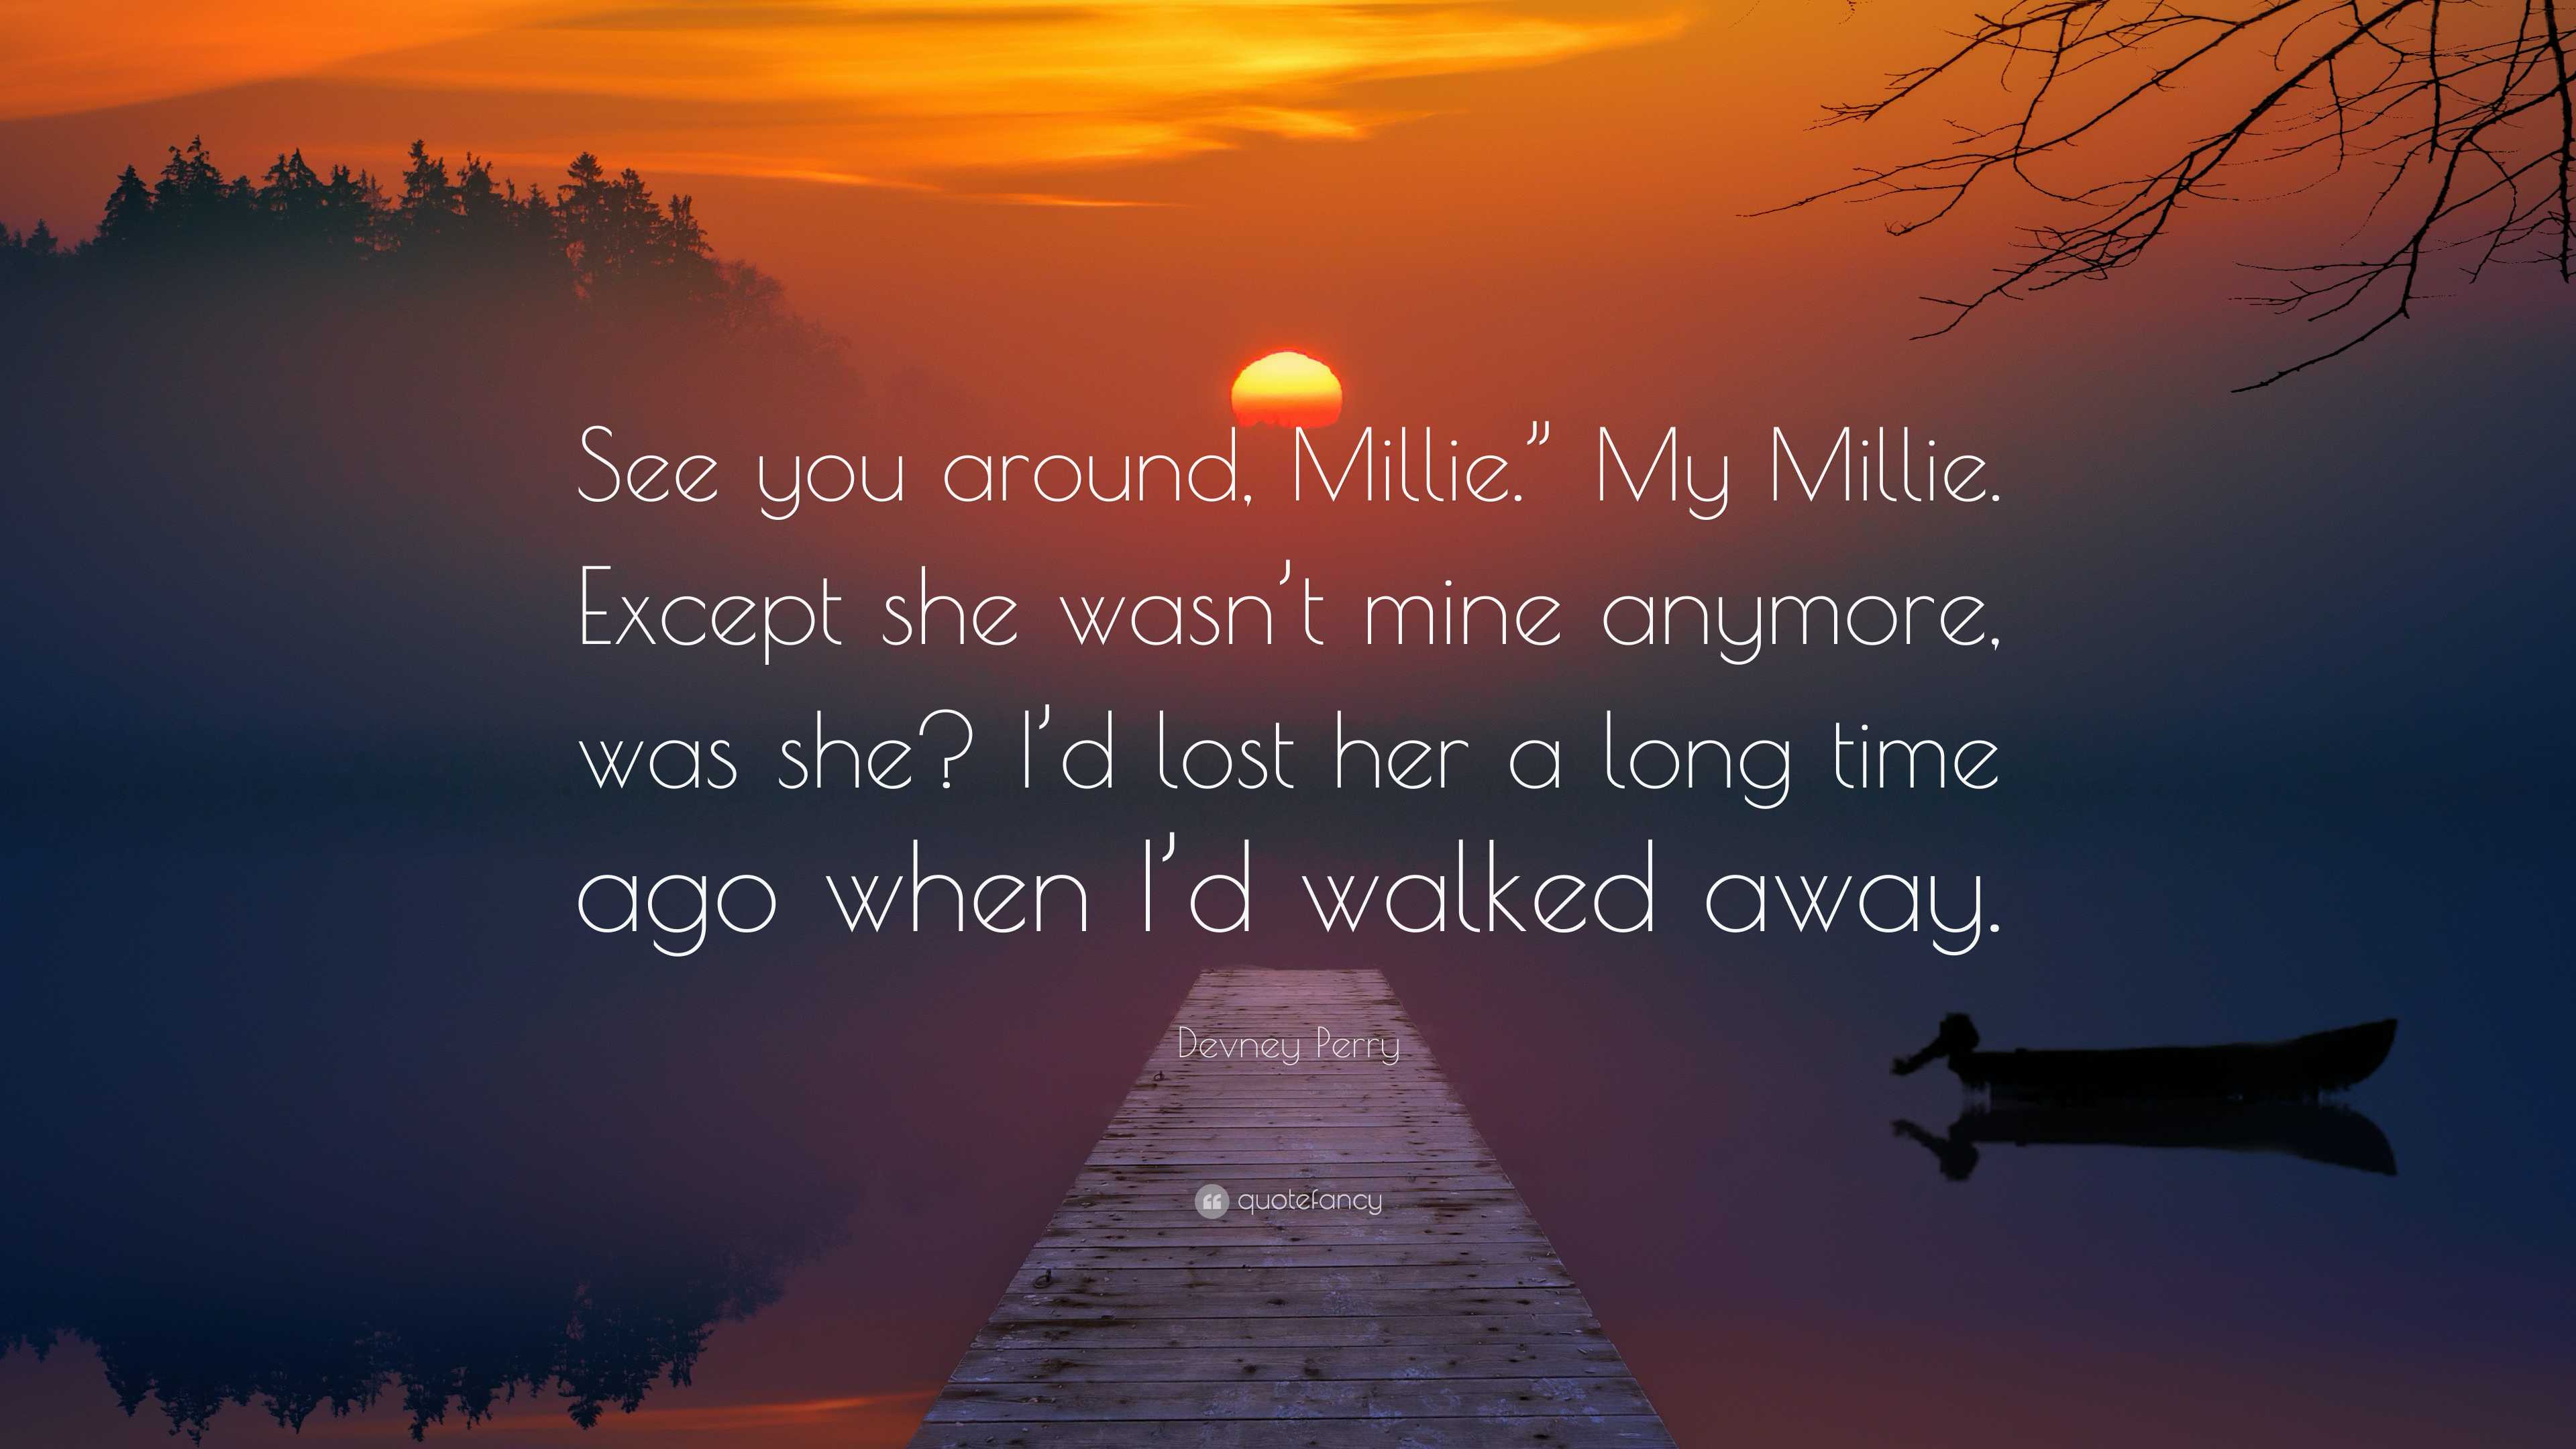 Devney Perry Quote: “See you around, Millie.” My Millie. Except she ...